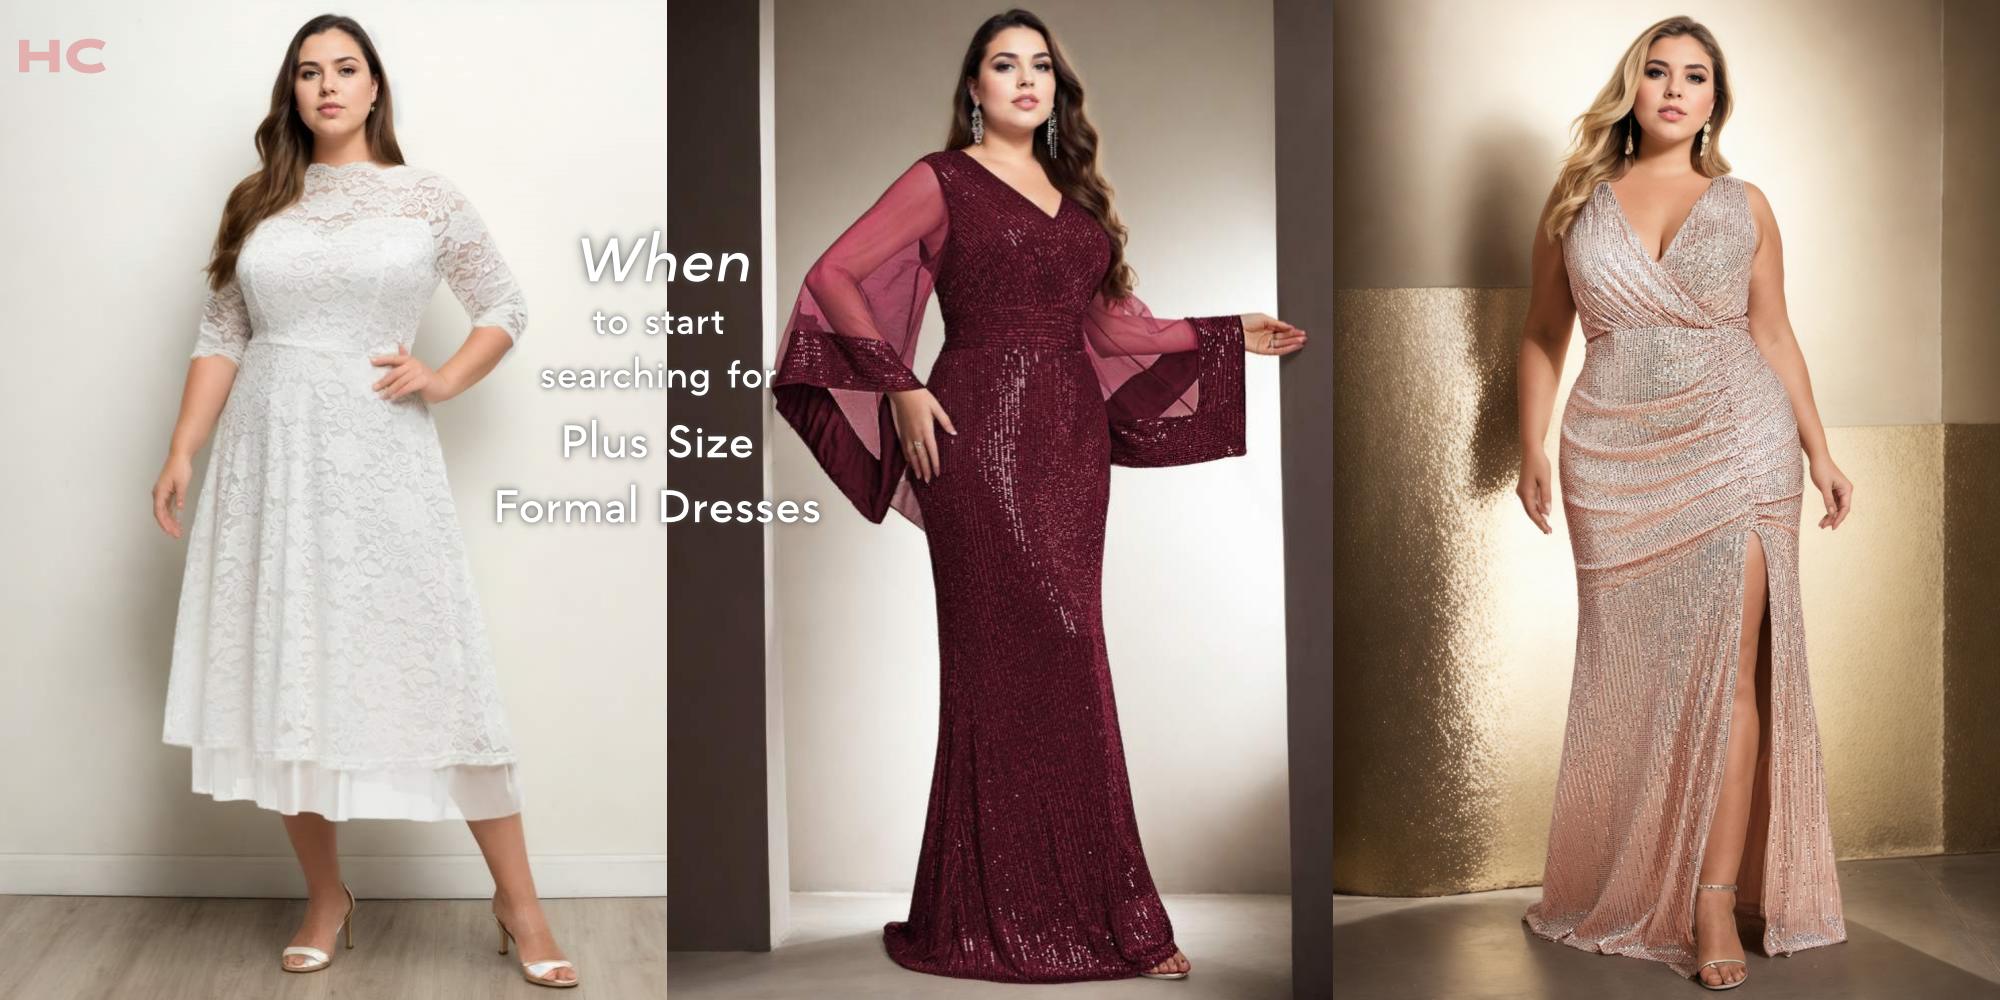 When to Start Searching for Plus Size Formal Dresses Before the Event?